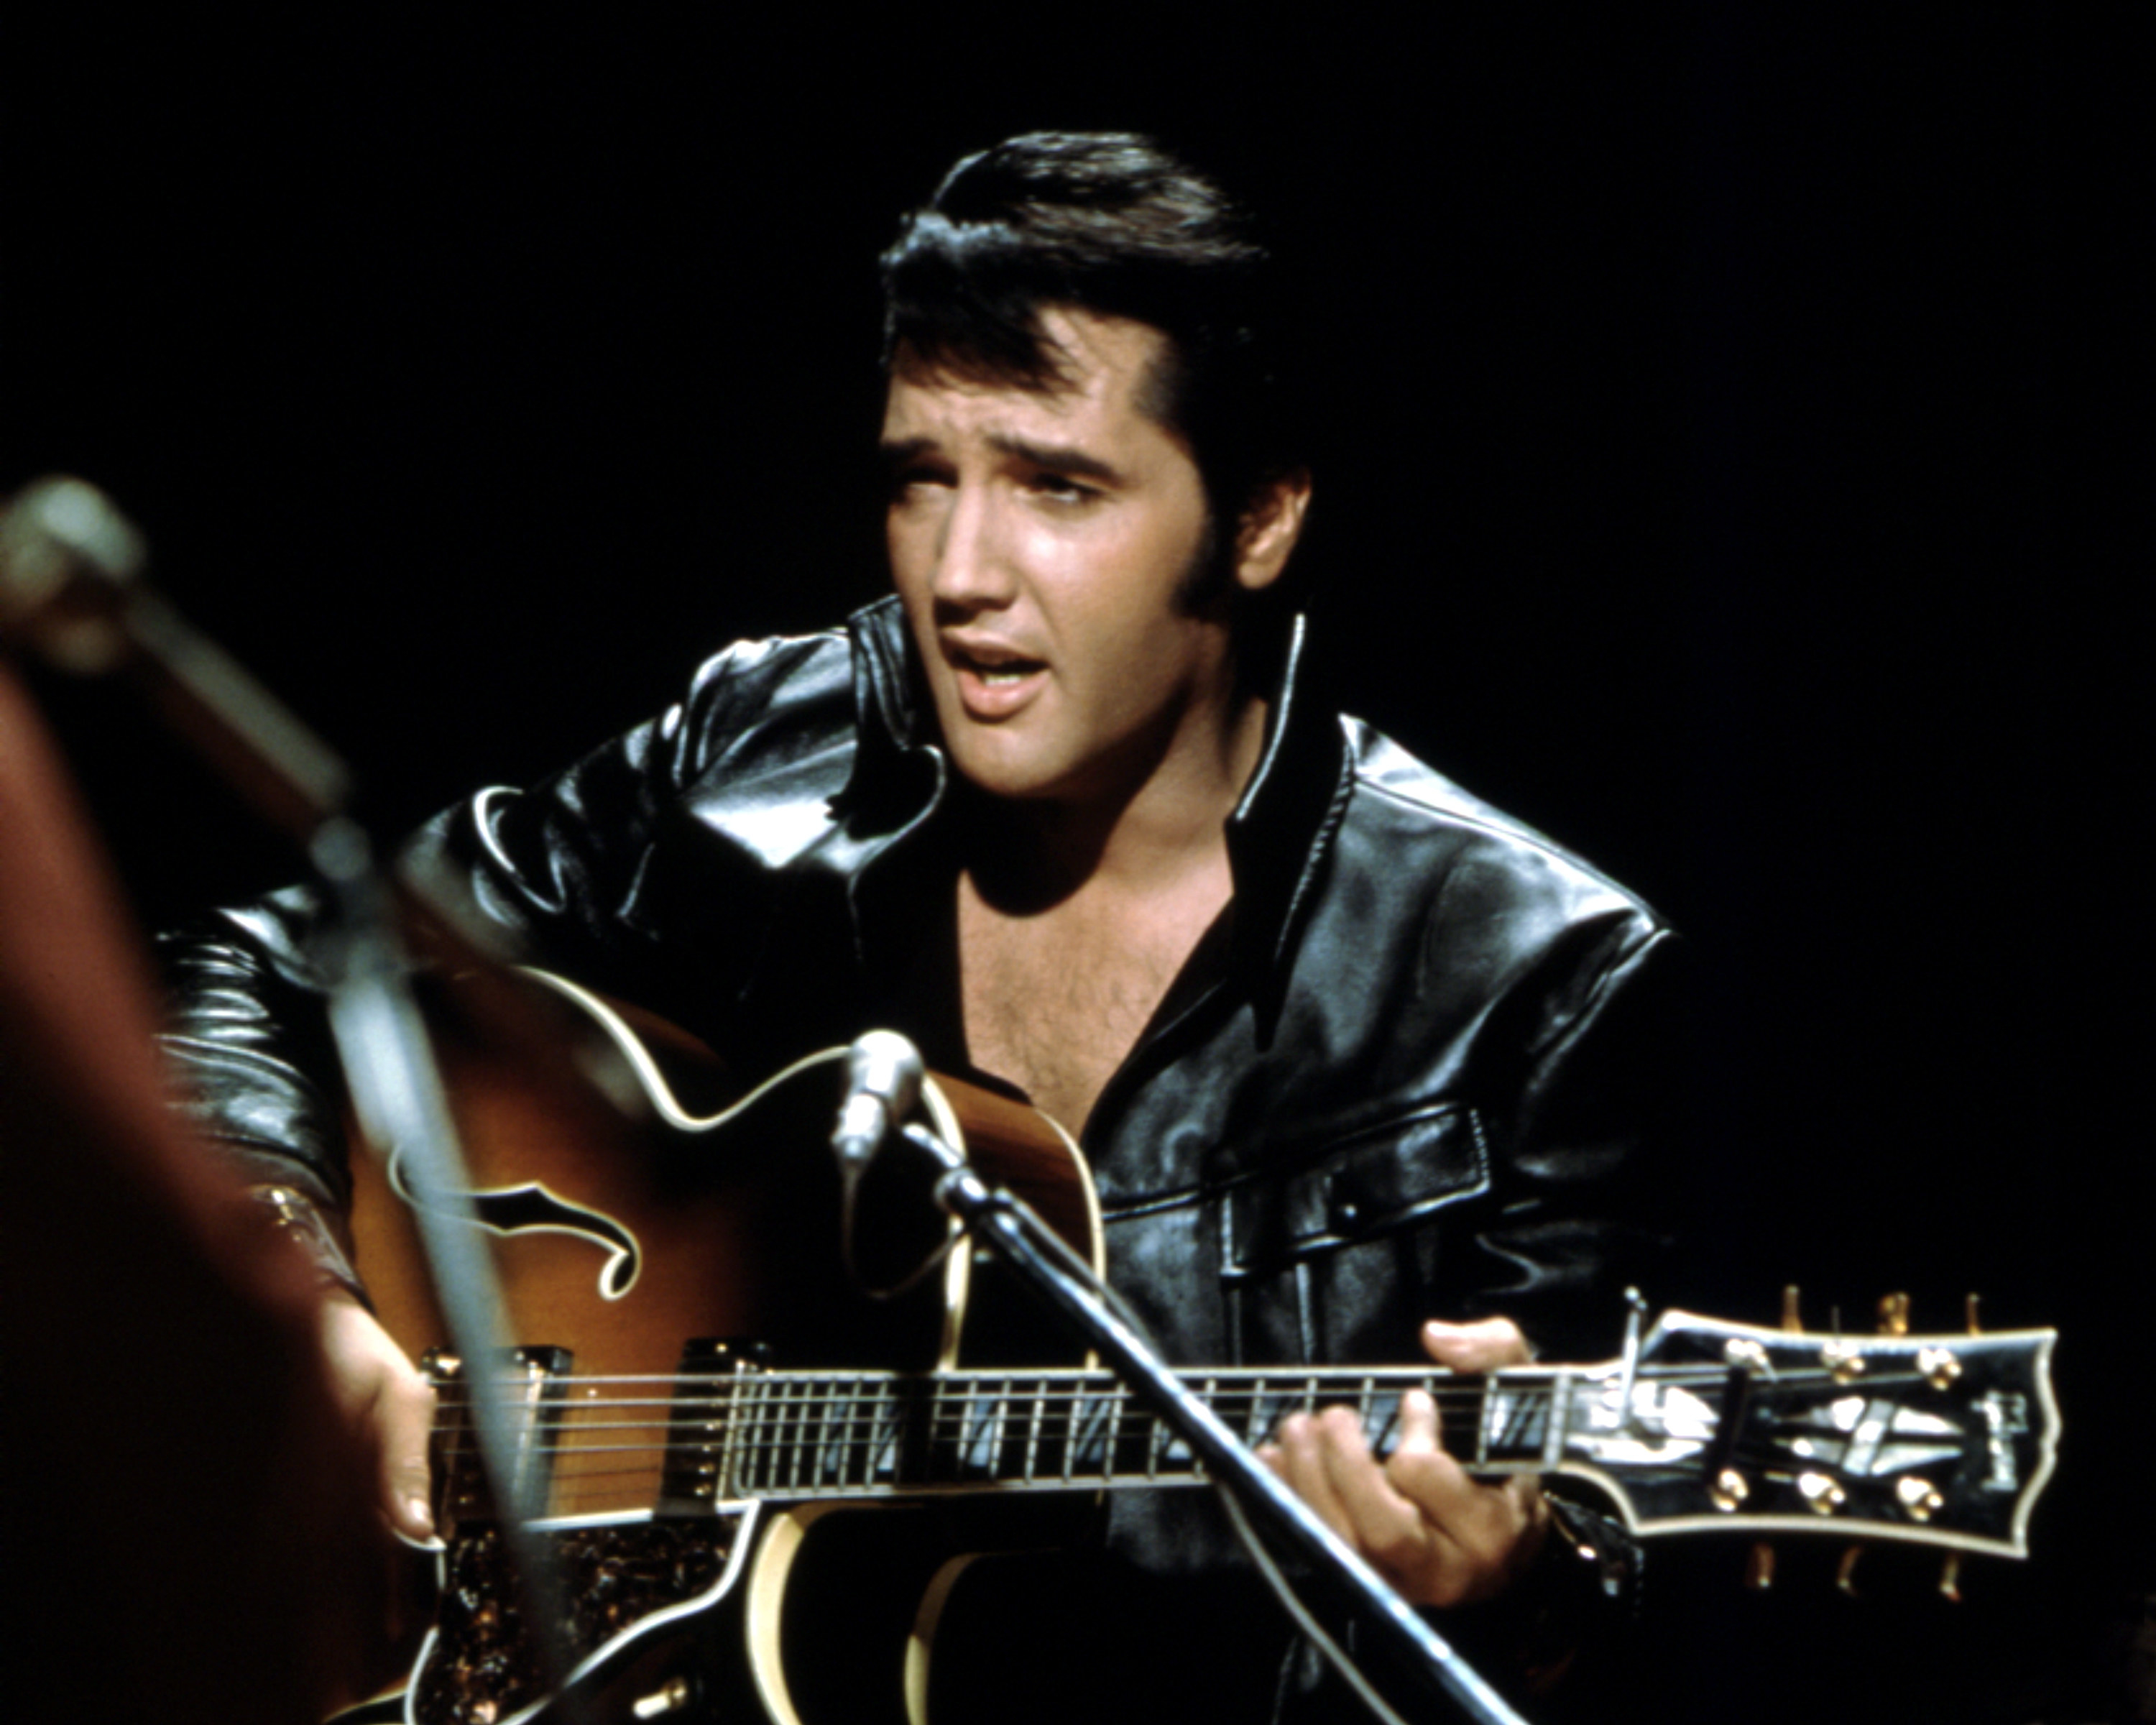 Elvis Presley playing the guitar and singing